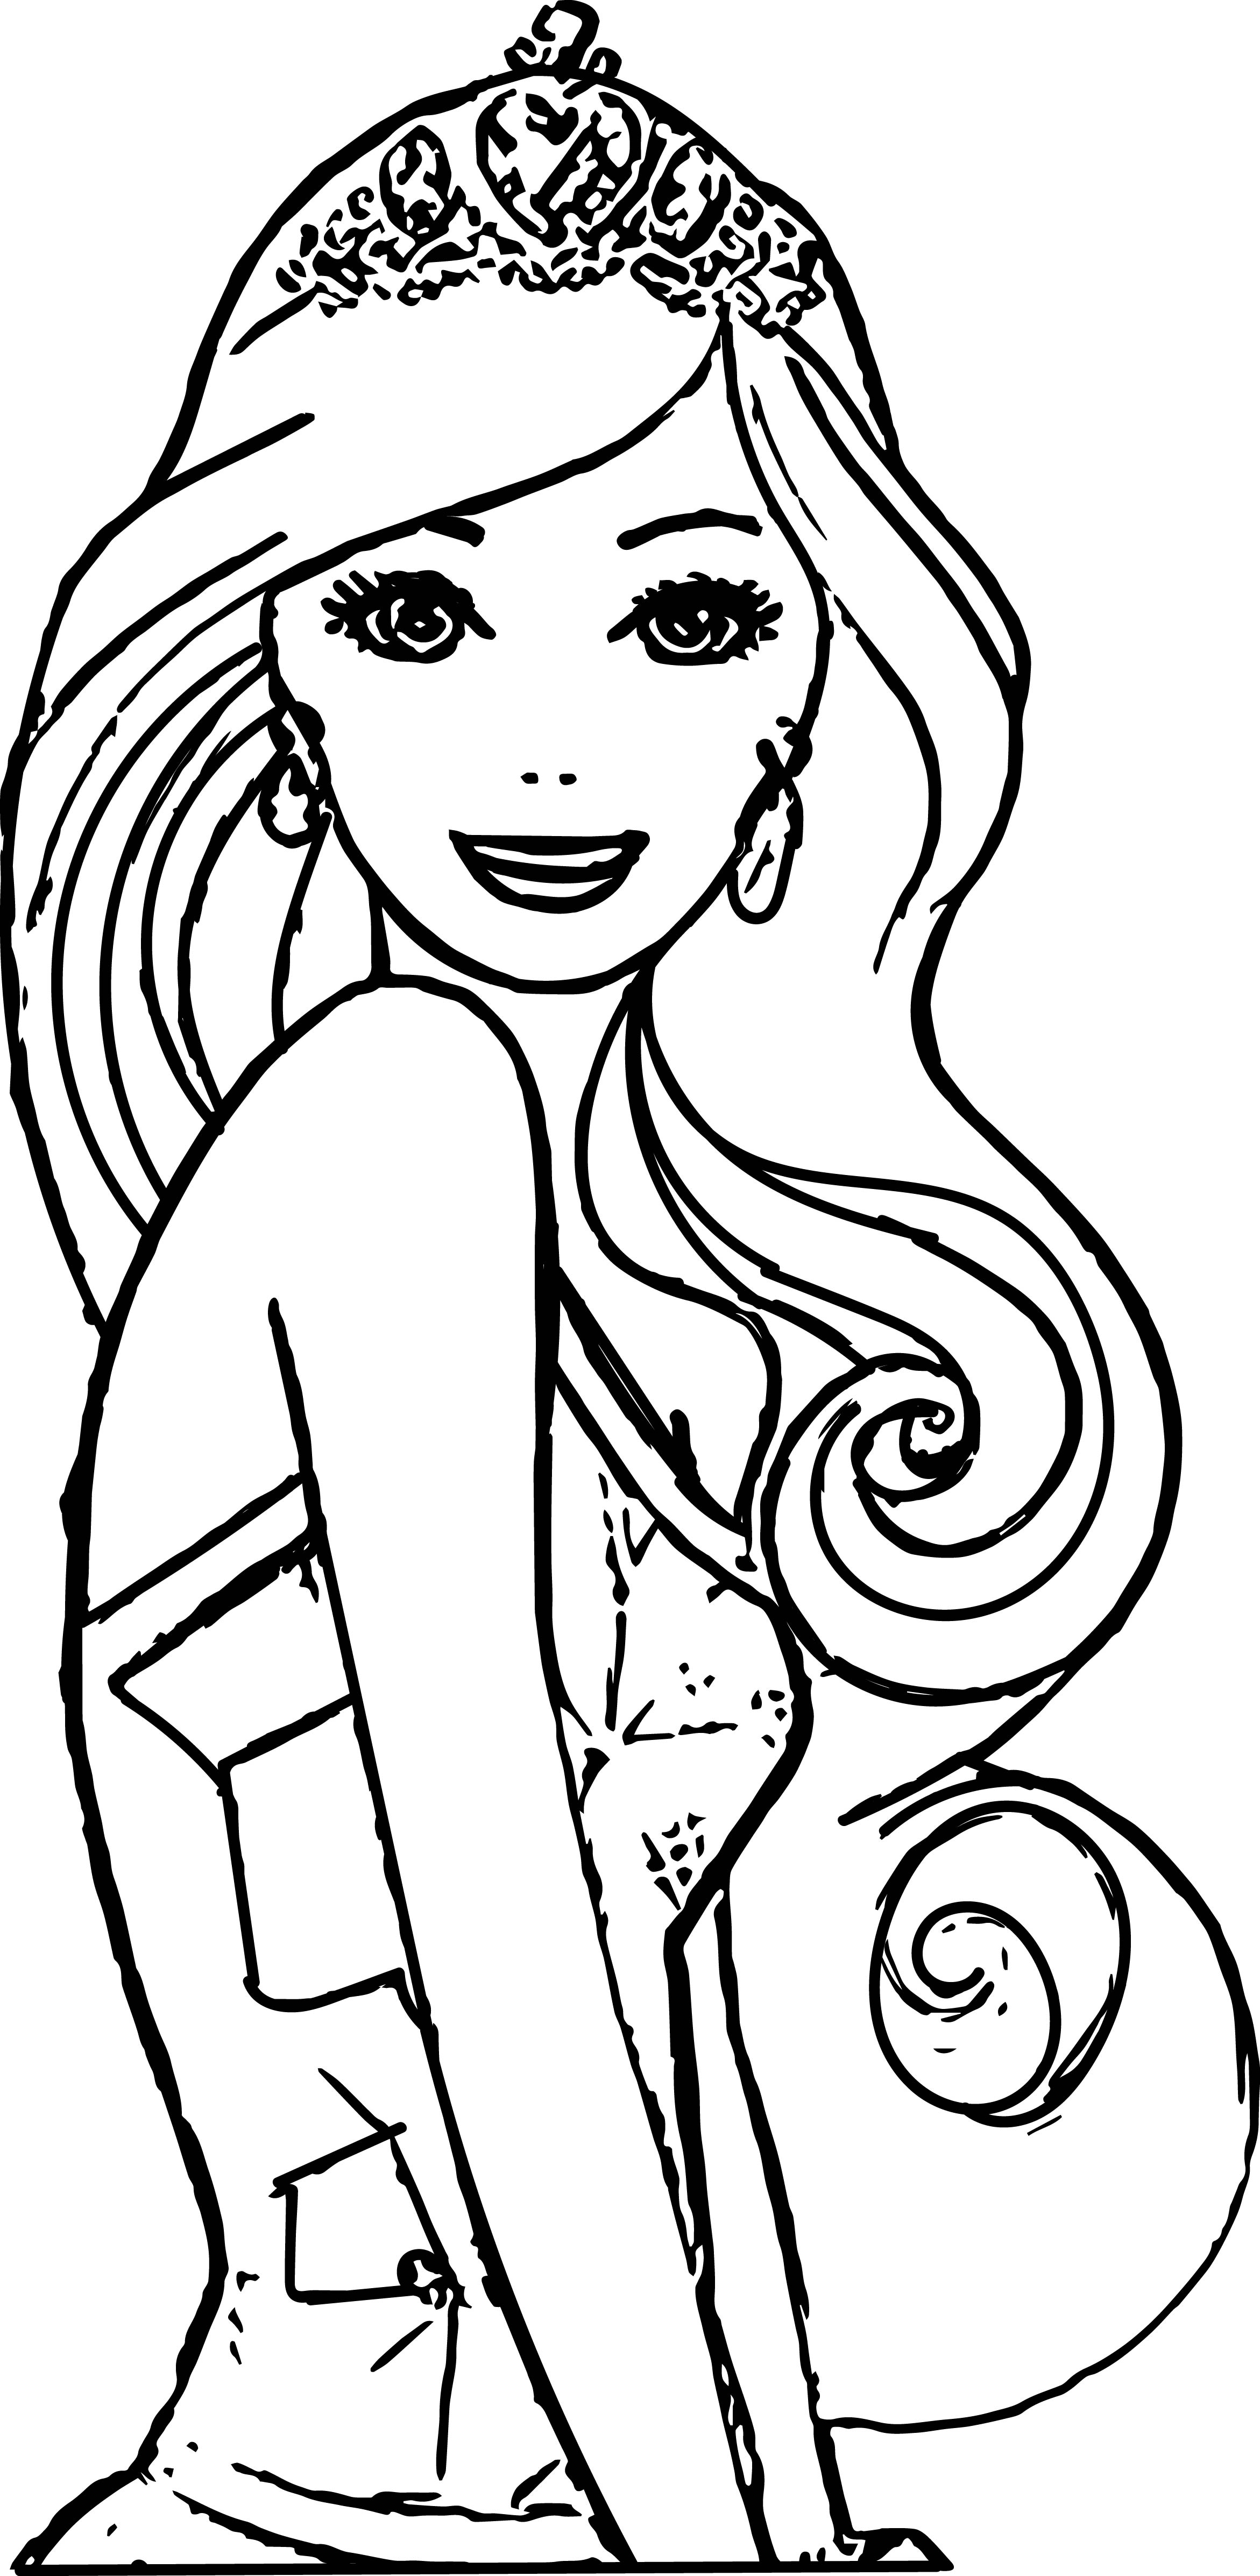 Barbie Face Coloring Pages at GetColorings.com   Free ...